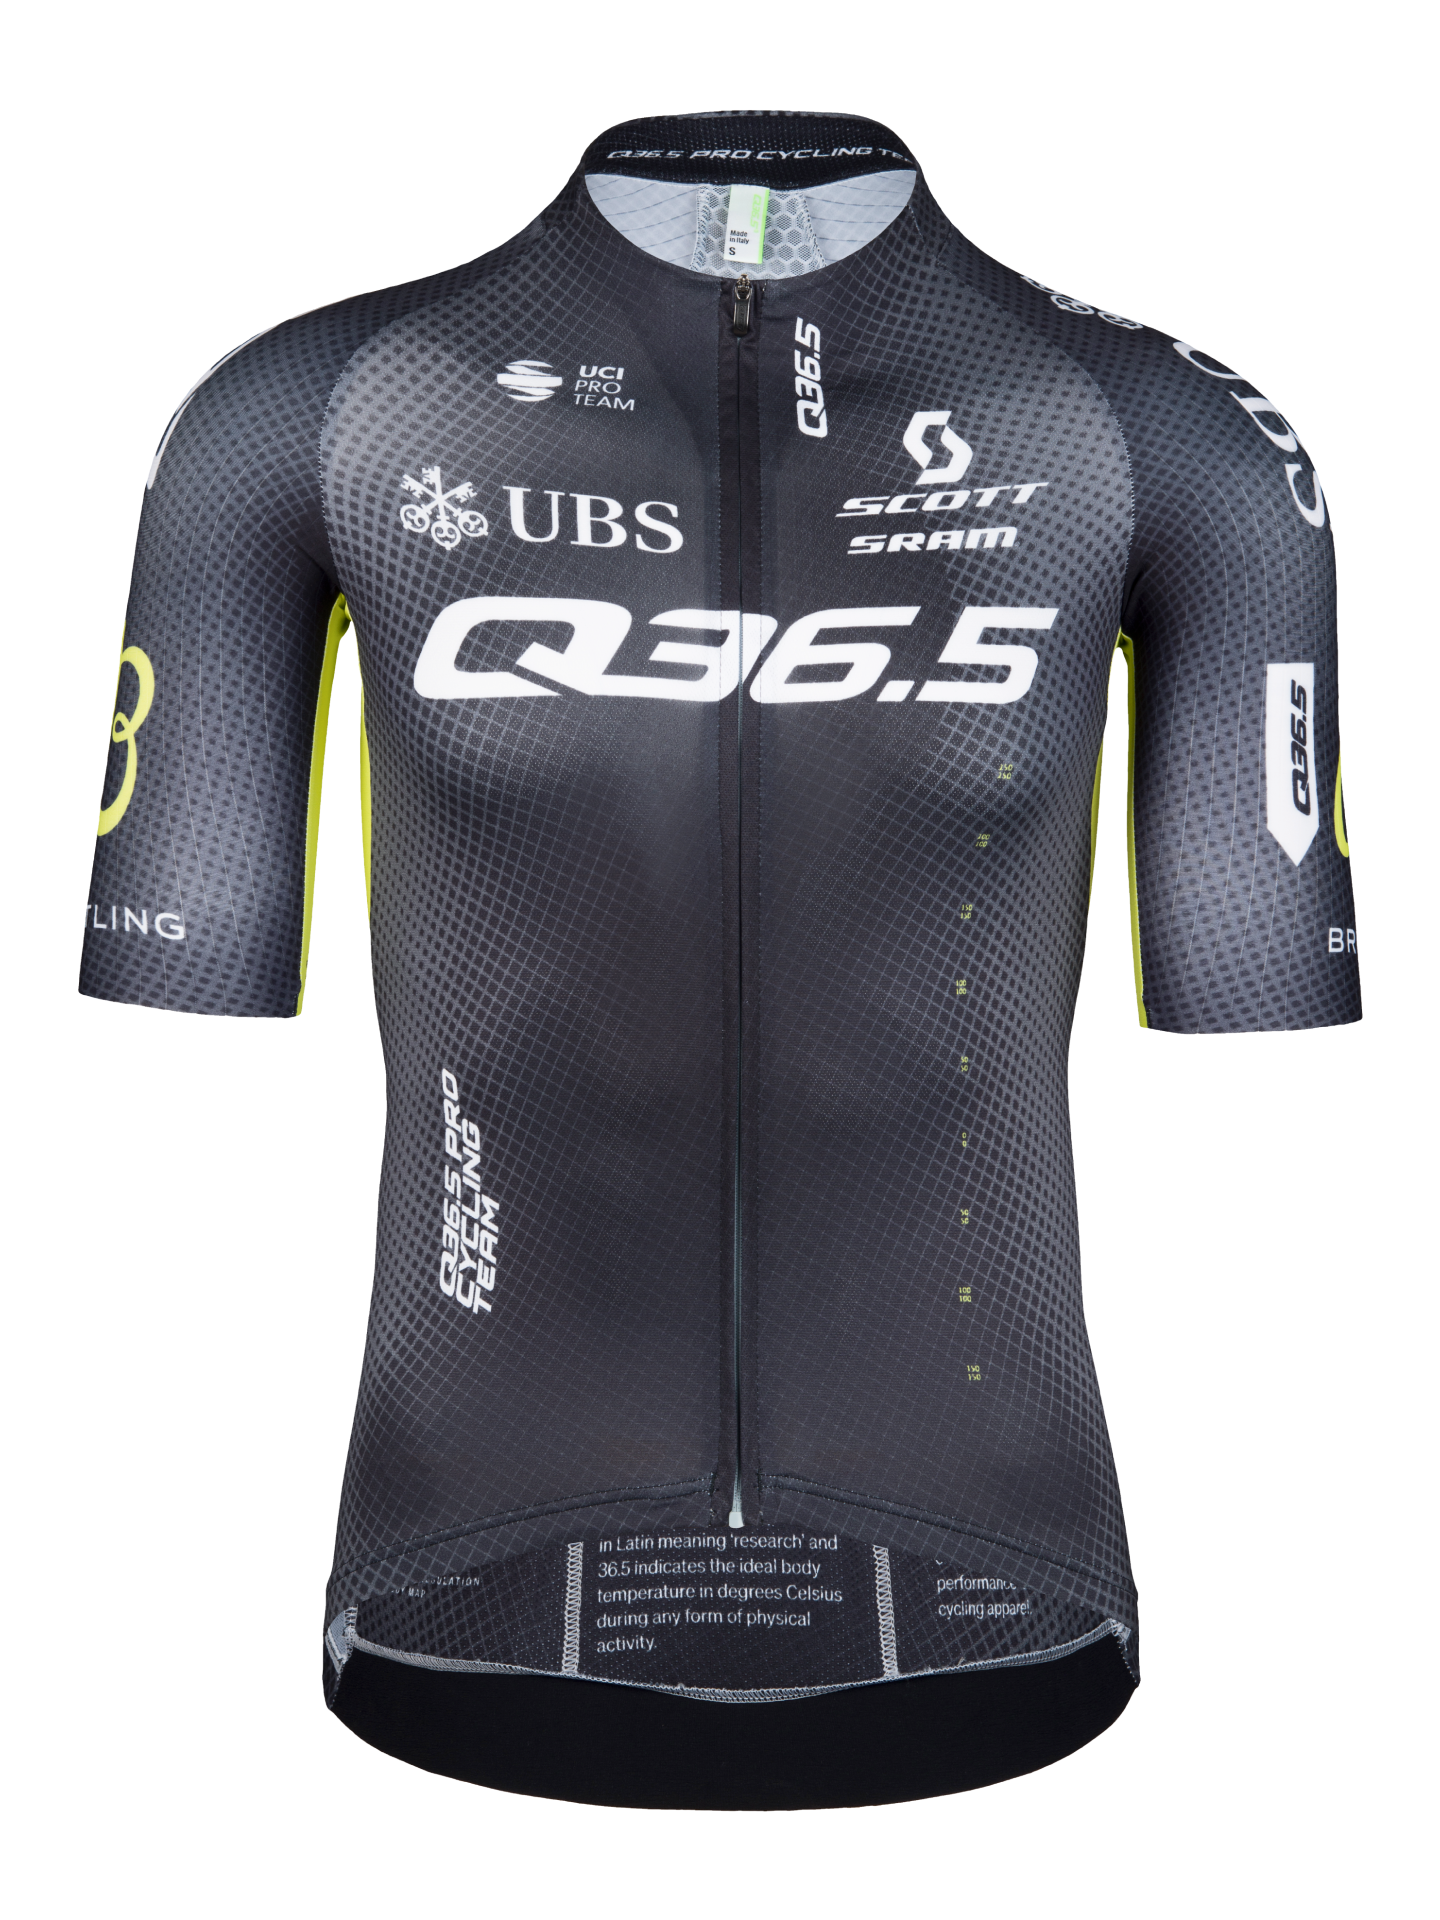 Q36.5 unveil grey jersey and host of sponsors for debut season